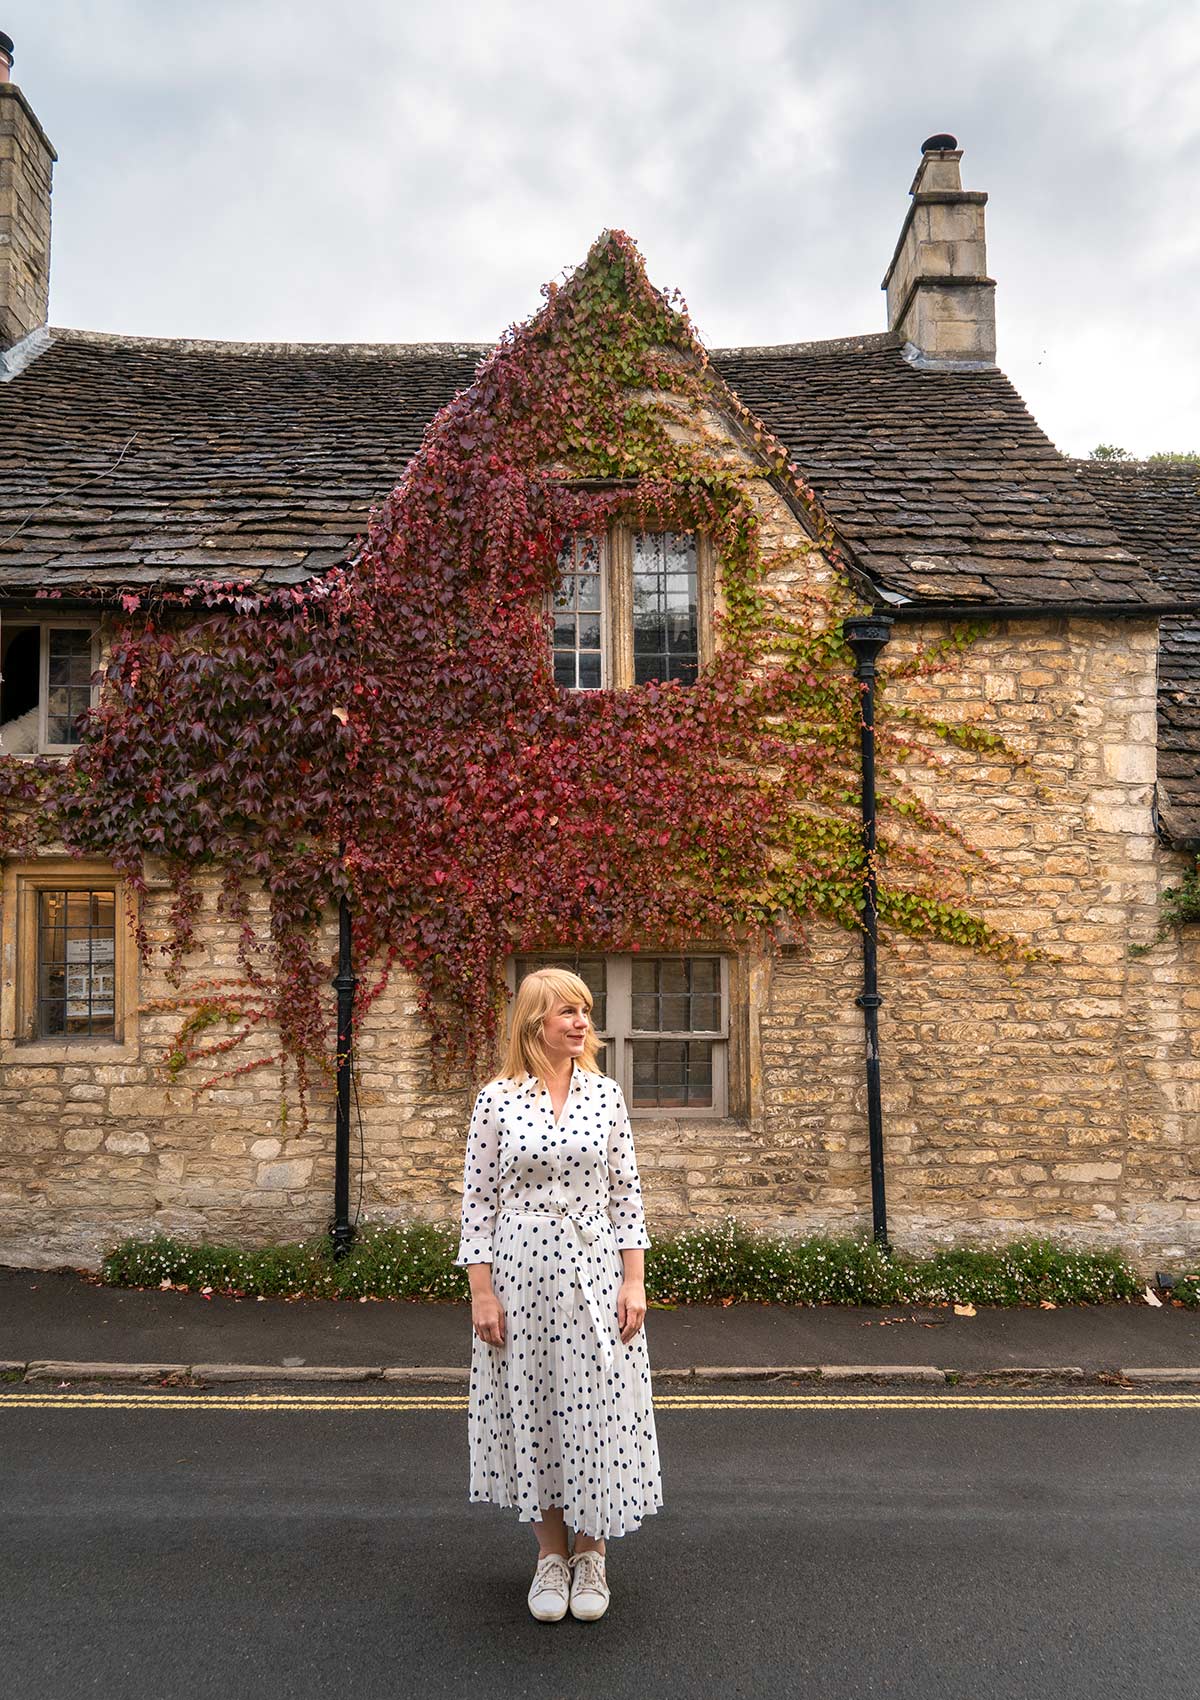 Evelyne, Automne, Castle Combe, Cotswolds, Angleterre, Royaume-Uni / Autumn, Castle Combe, Cotswolds, England, UK